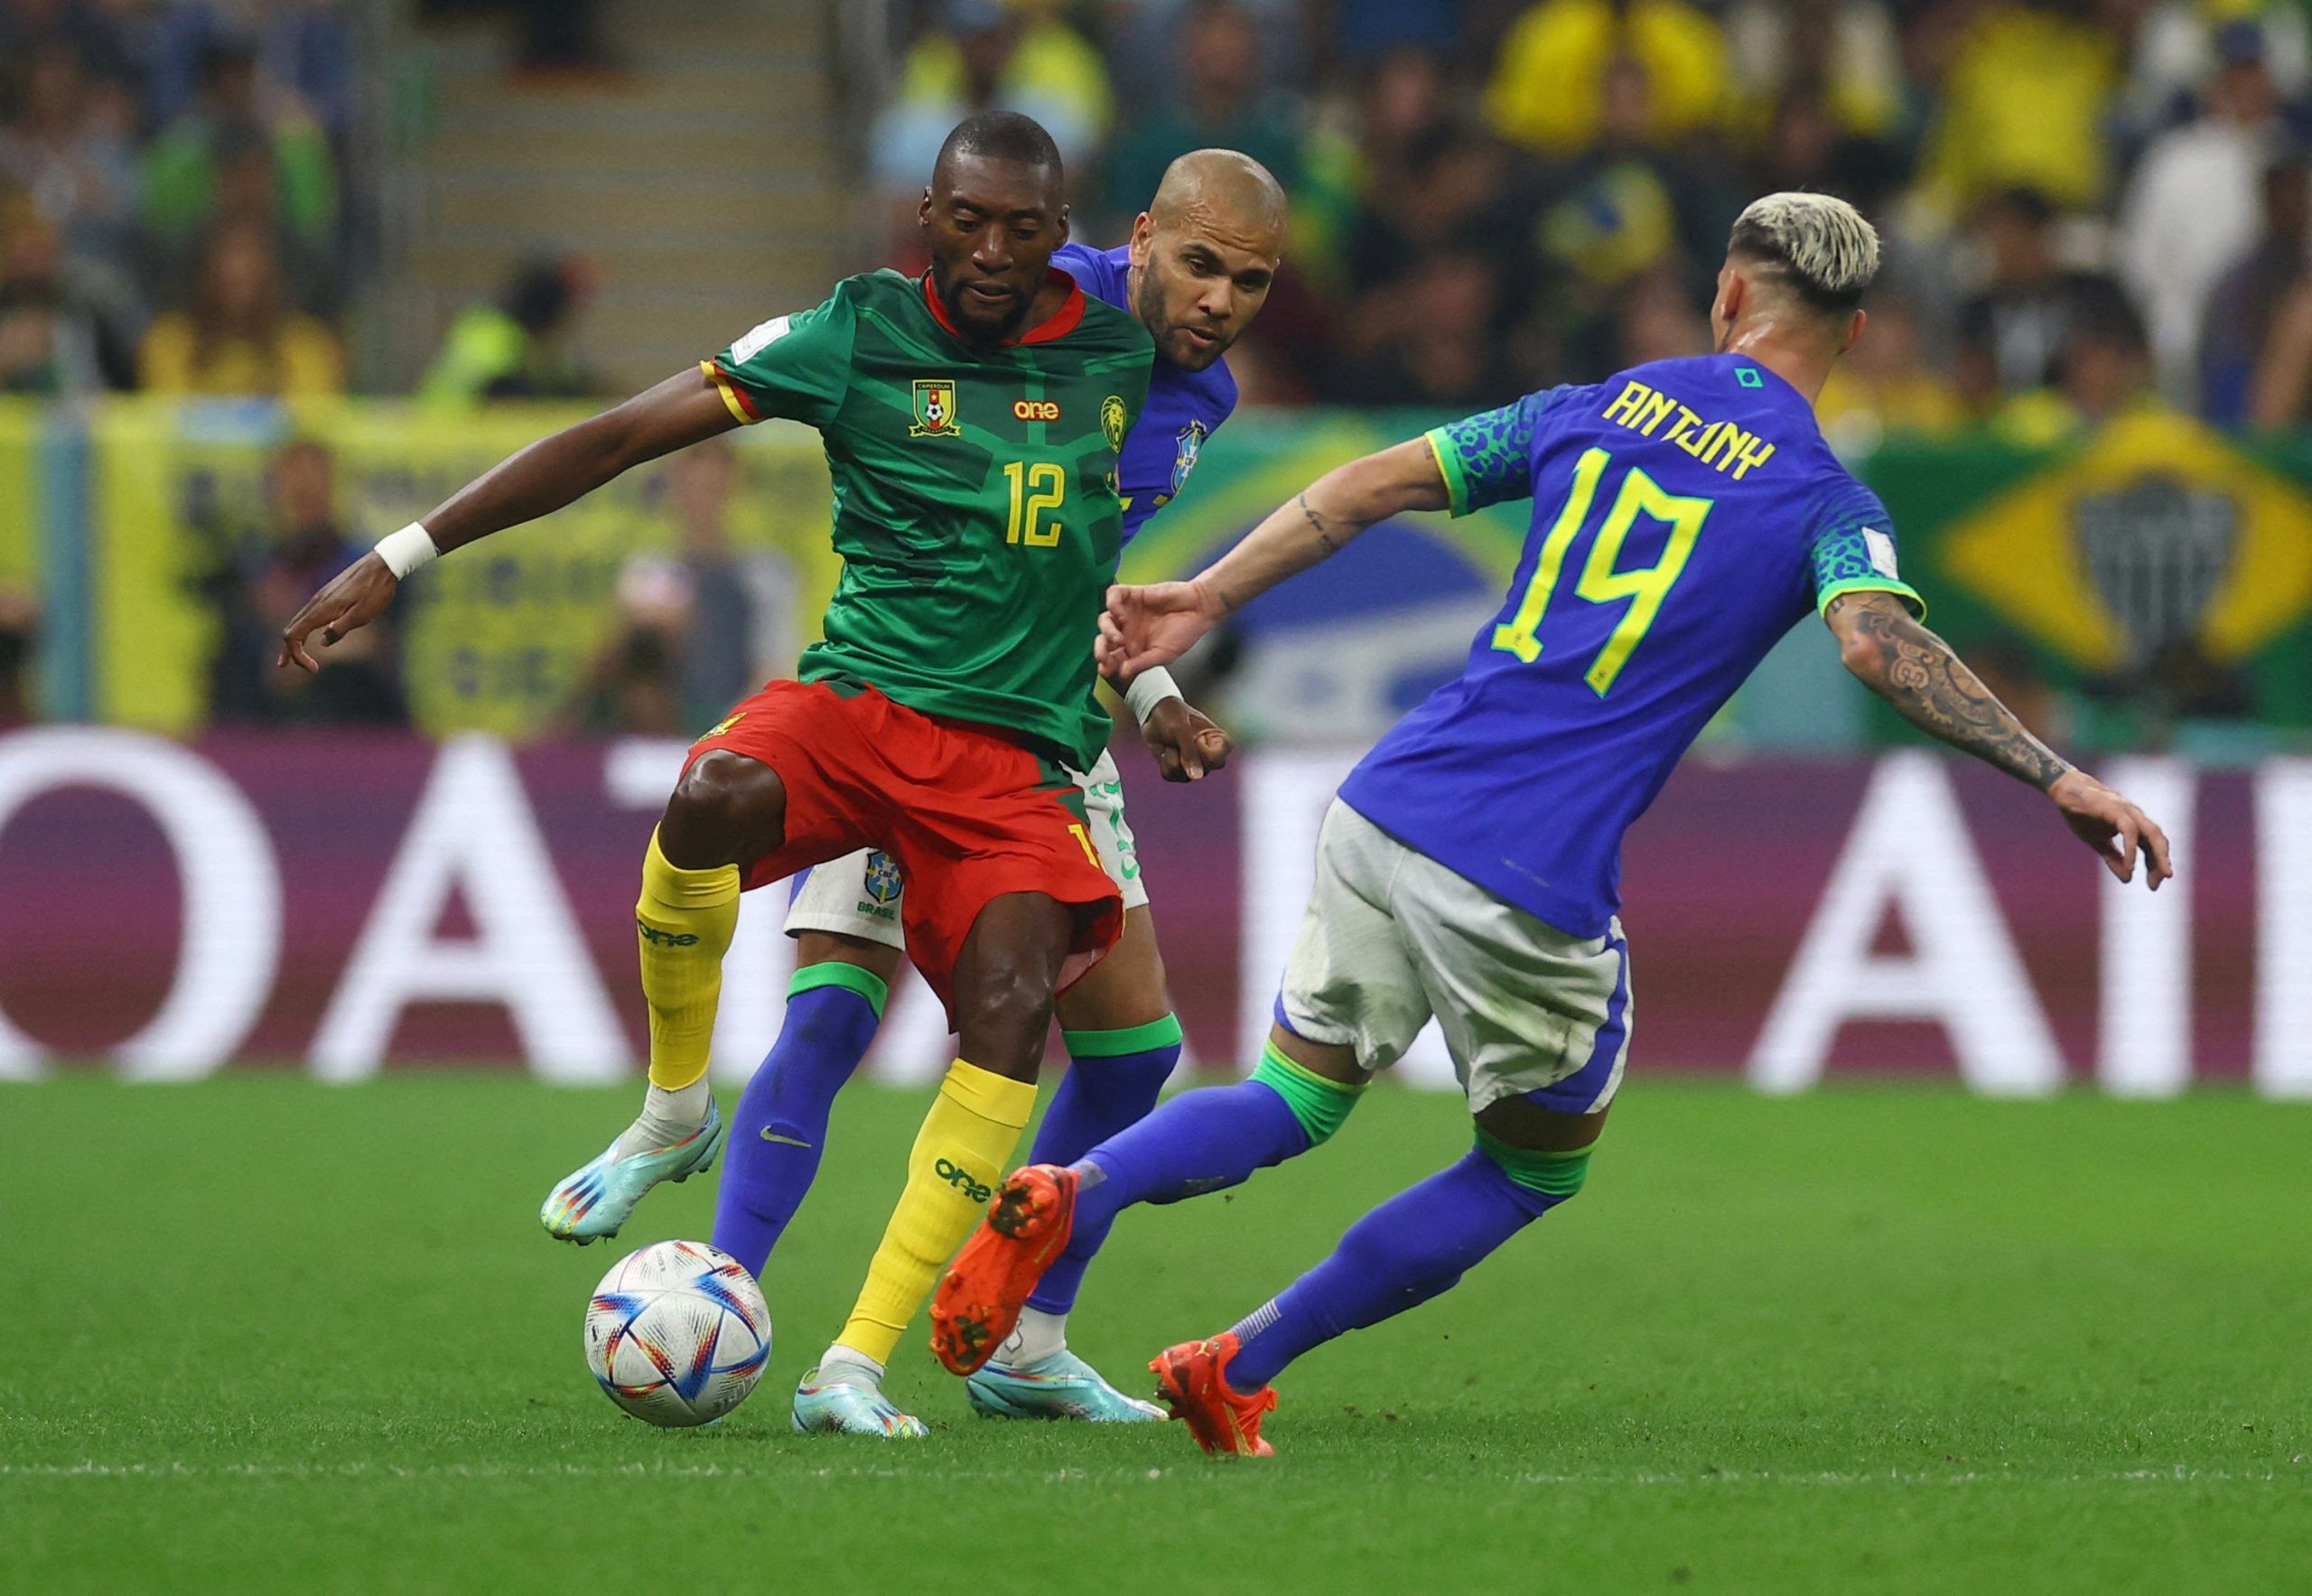 Soccer Football - FIFA World Cup Qatar 2022 - Group G - Cameroon v Brazil - Lusail Stadium, Lusail, Qatar - December 2, 2022 Cameroon's Karl Toko Ekambi in action with Brazil's Dani Alves and Antony REUTERS/Paul Childs